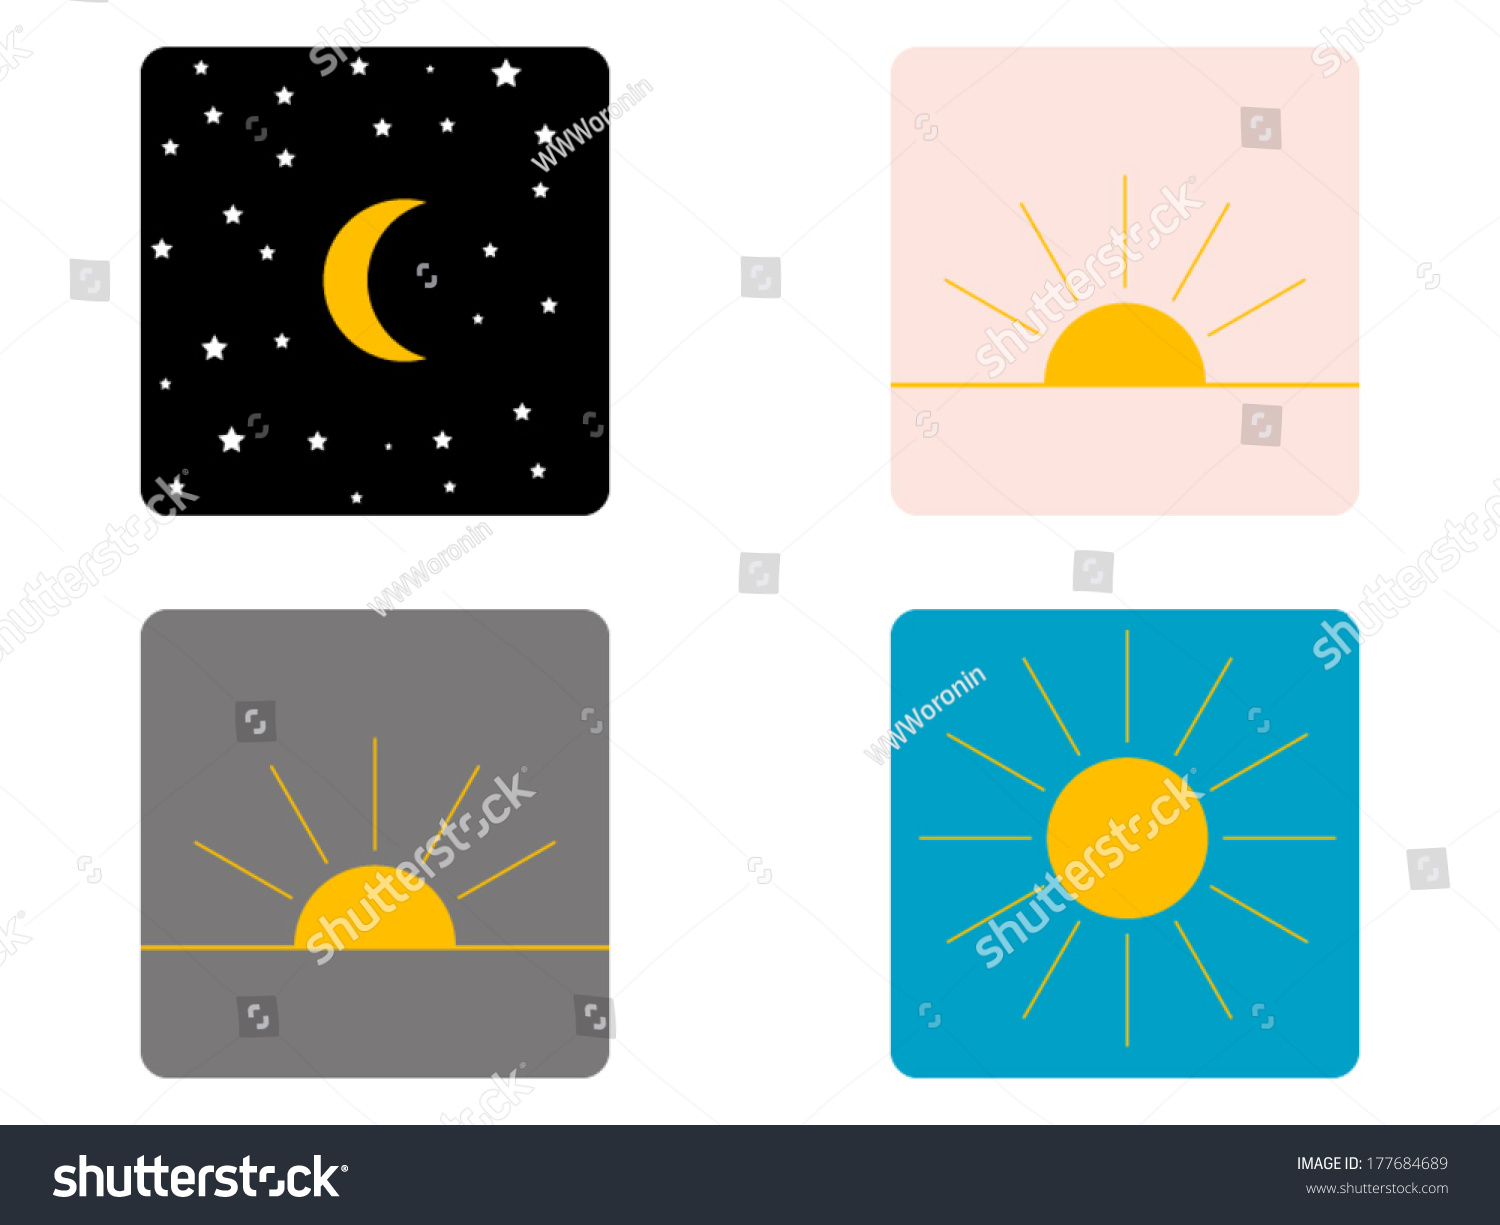 Graphical Representation Day Night Morning Afternoon Stock Vector ...